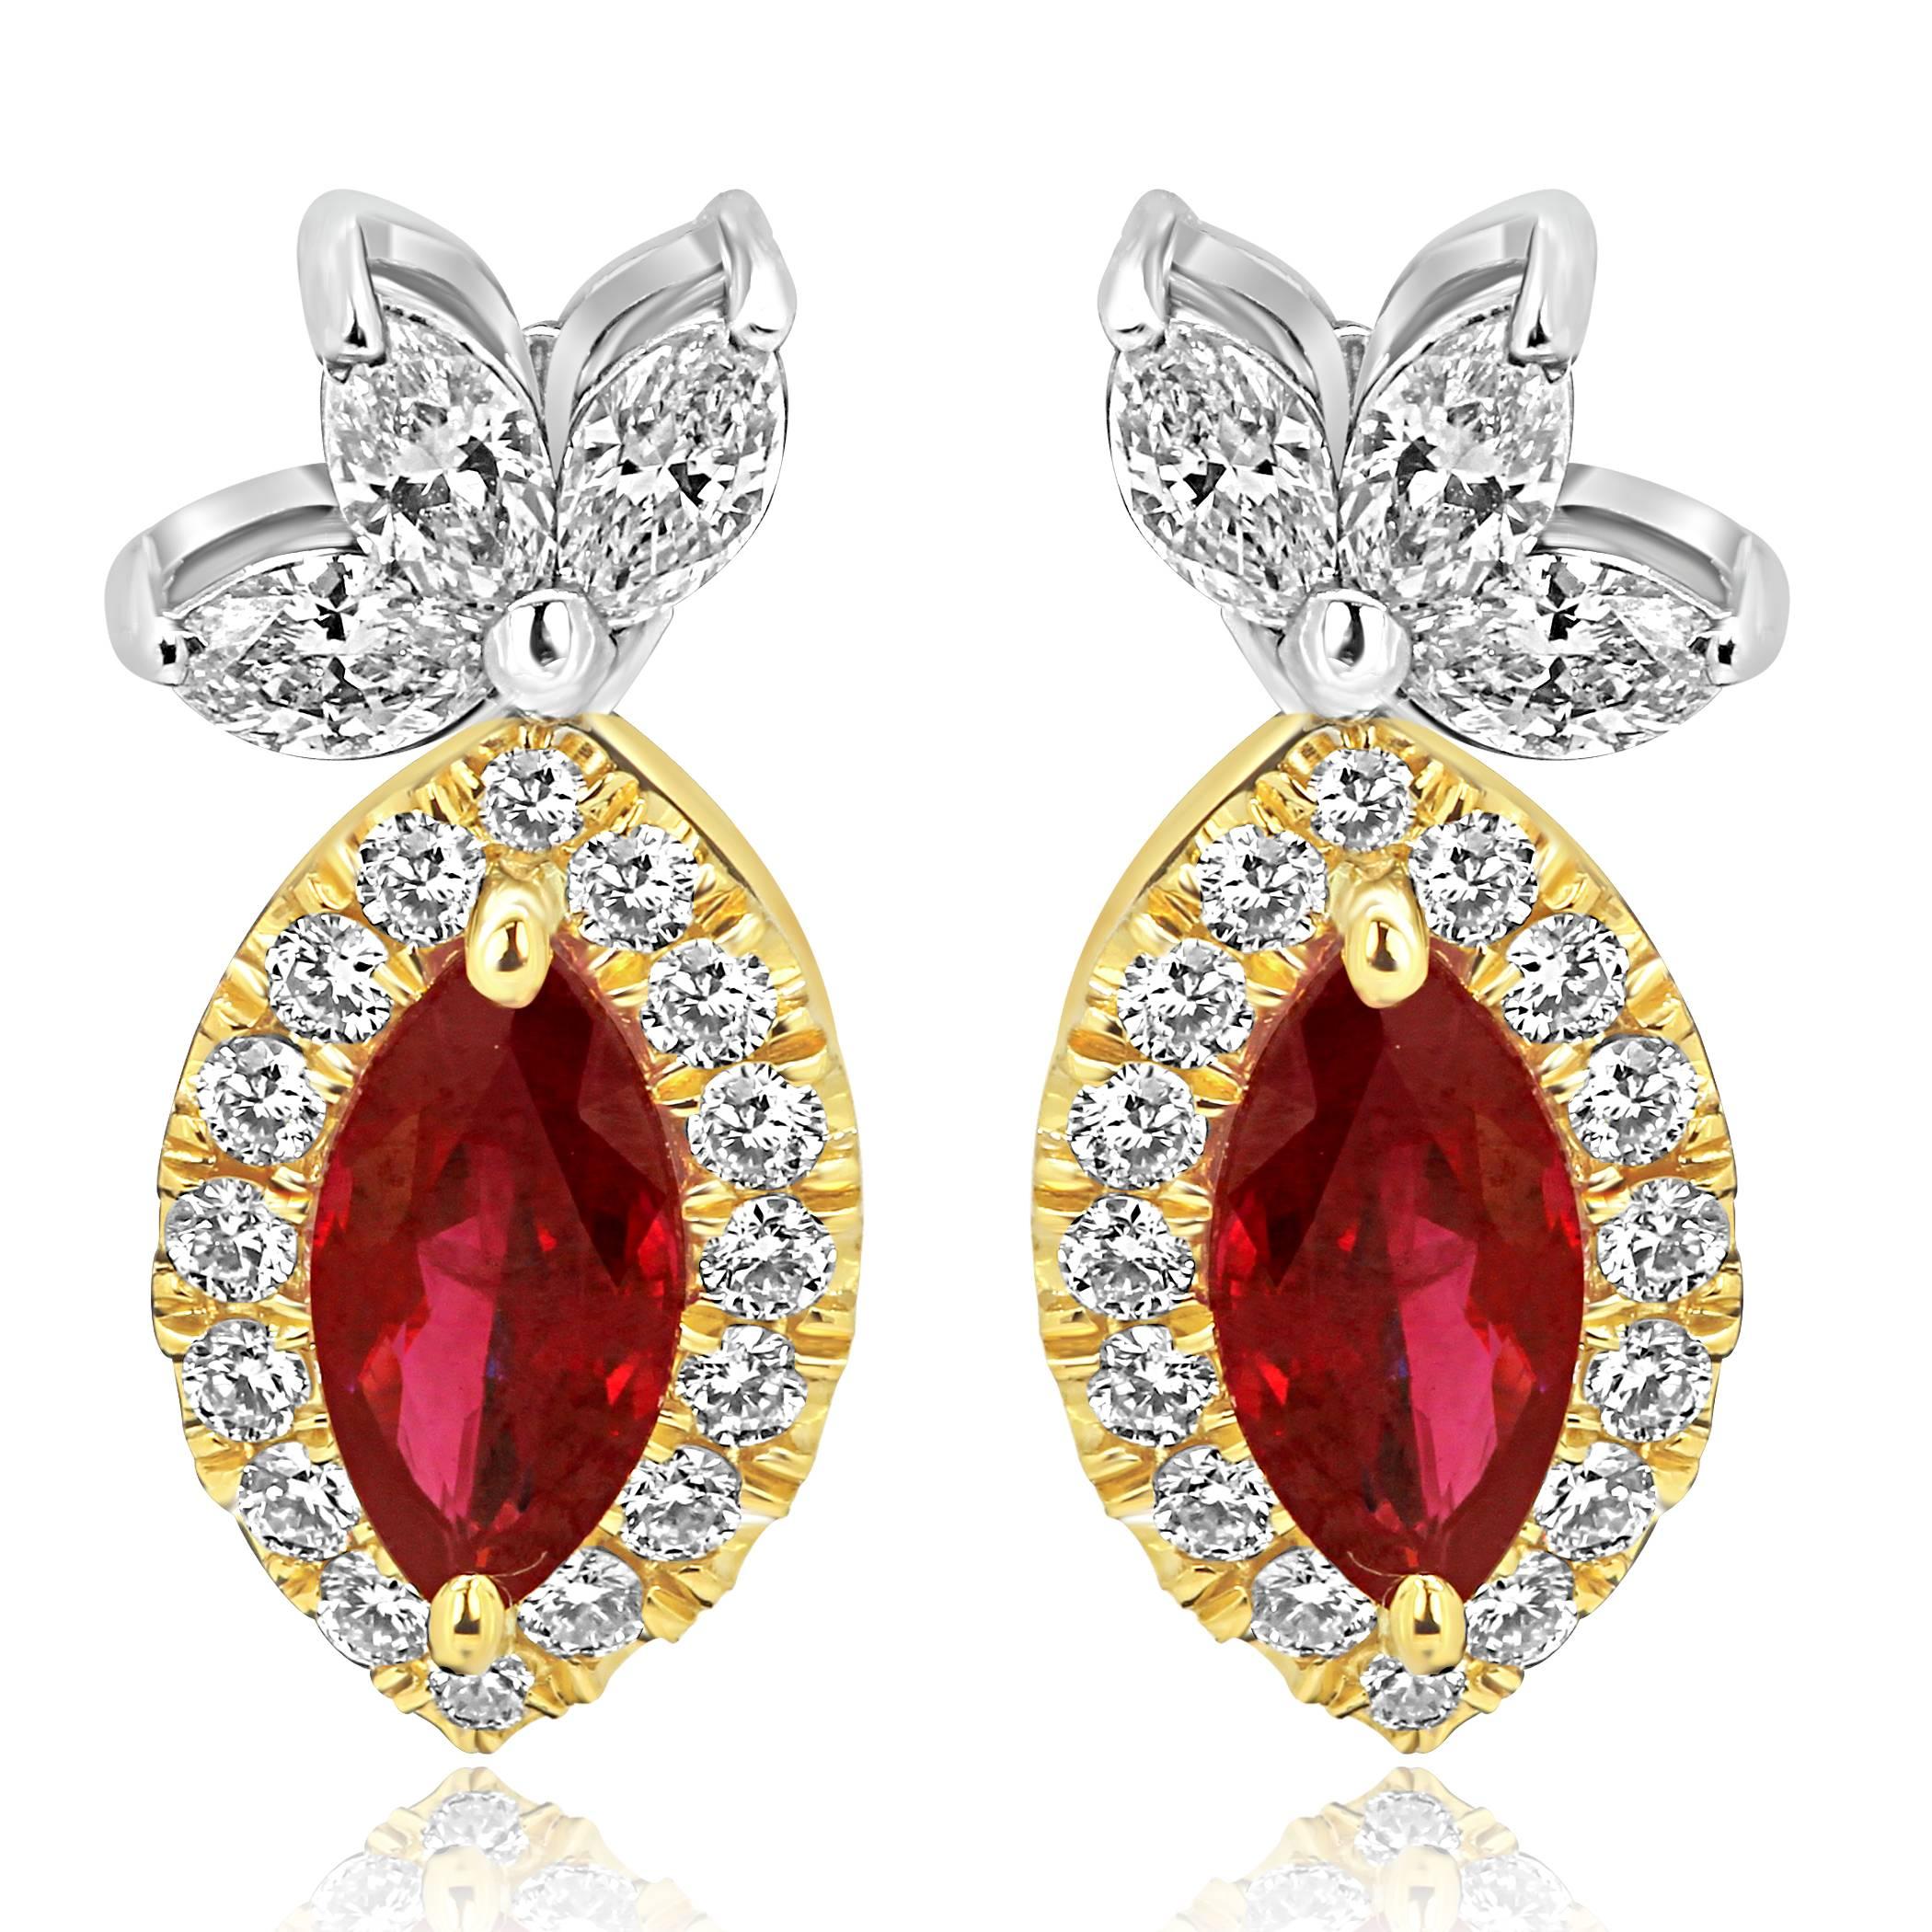 Stunning 2 Ruby Marquise 1.68 Carat encircled in a single halo of white round diamonds 0.66 Carat with 6 White Diamond Marquise on top 0.66 Carat in 18K White and Yellow Gold Chic every day wear earrings.

Style available in different price ranges.